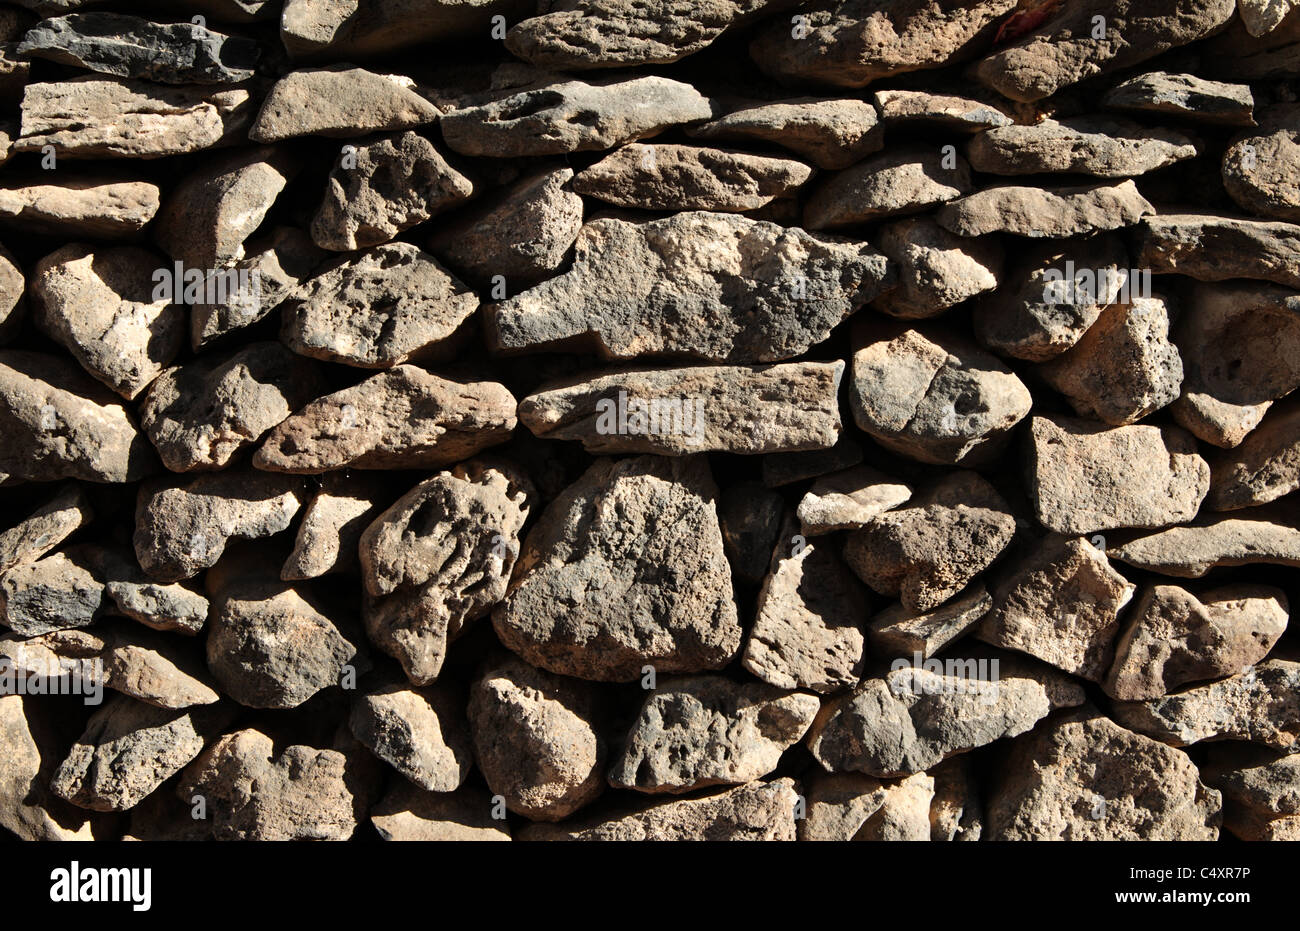 Dry stone wall made from volcanic rock Stock Photo